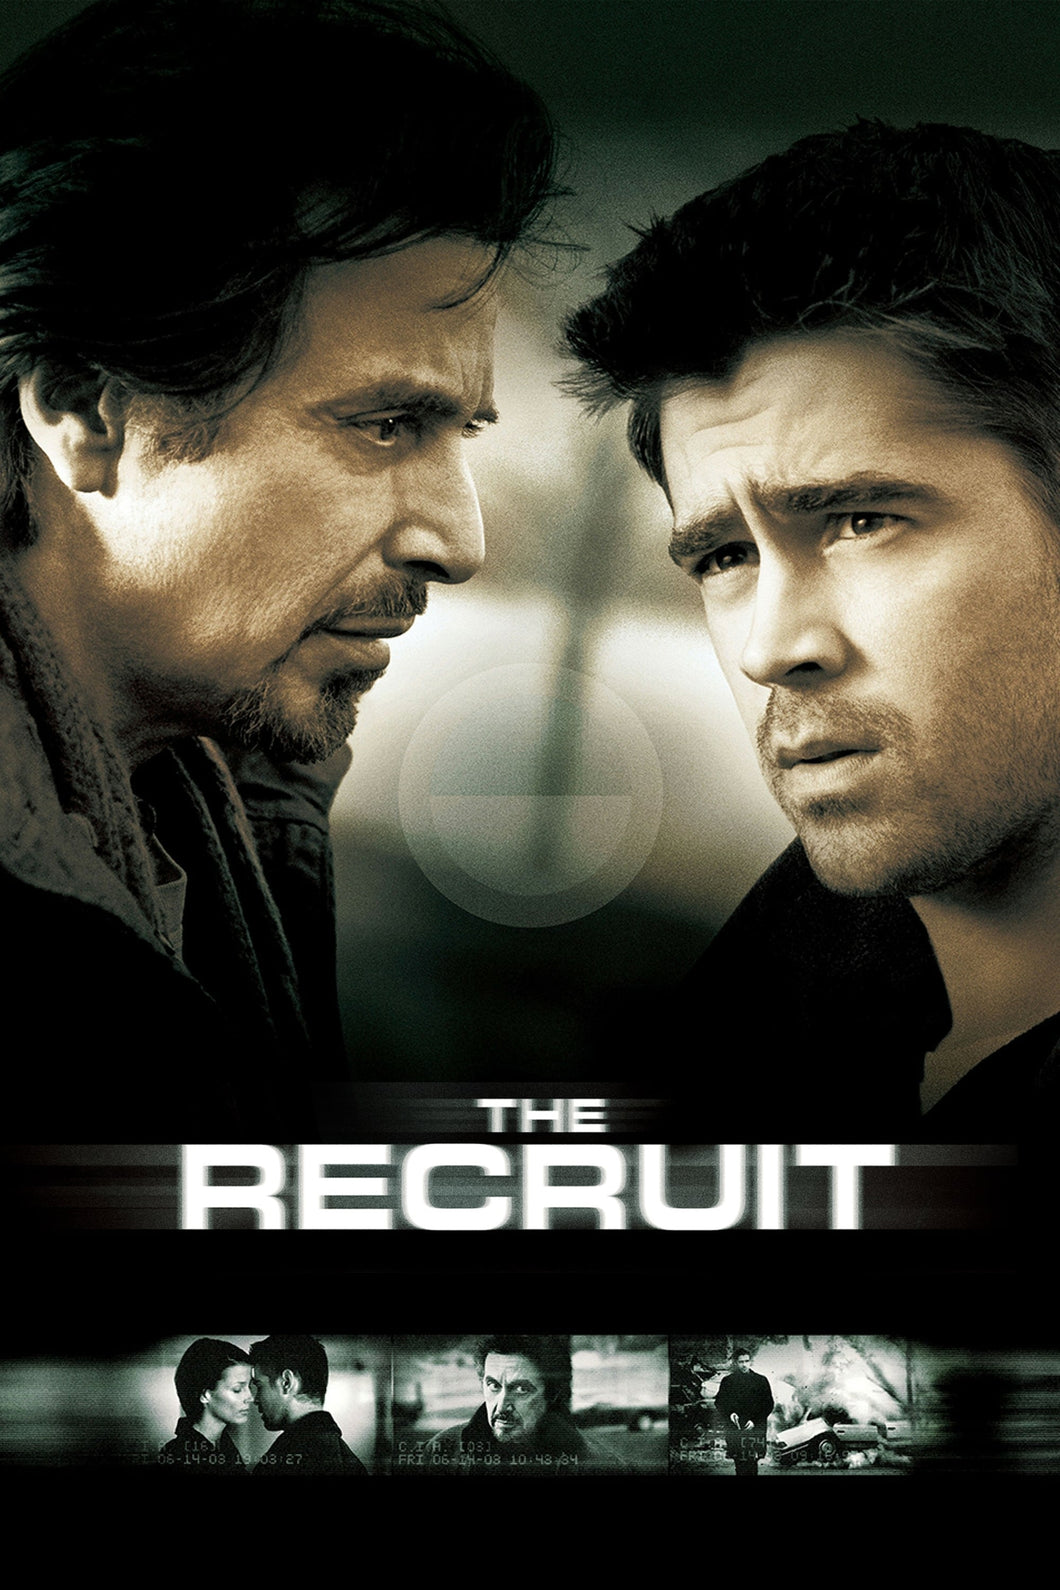 The Recruit (2003) Movie Poster High Quality Glossy Paper A1 A2 A3 A4 A3 Framed or Unframed!!!